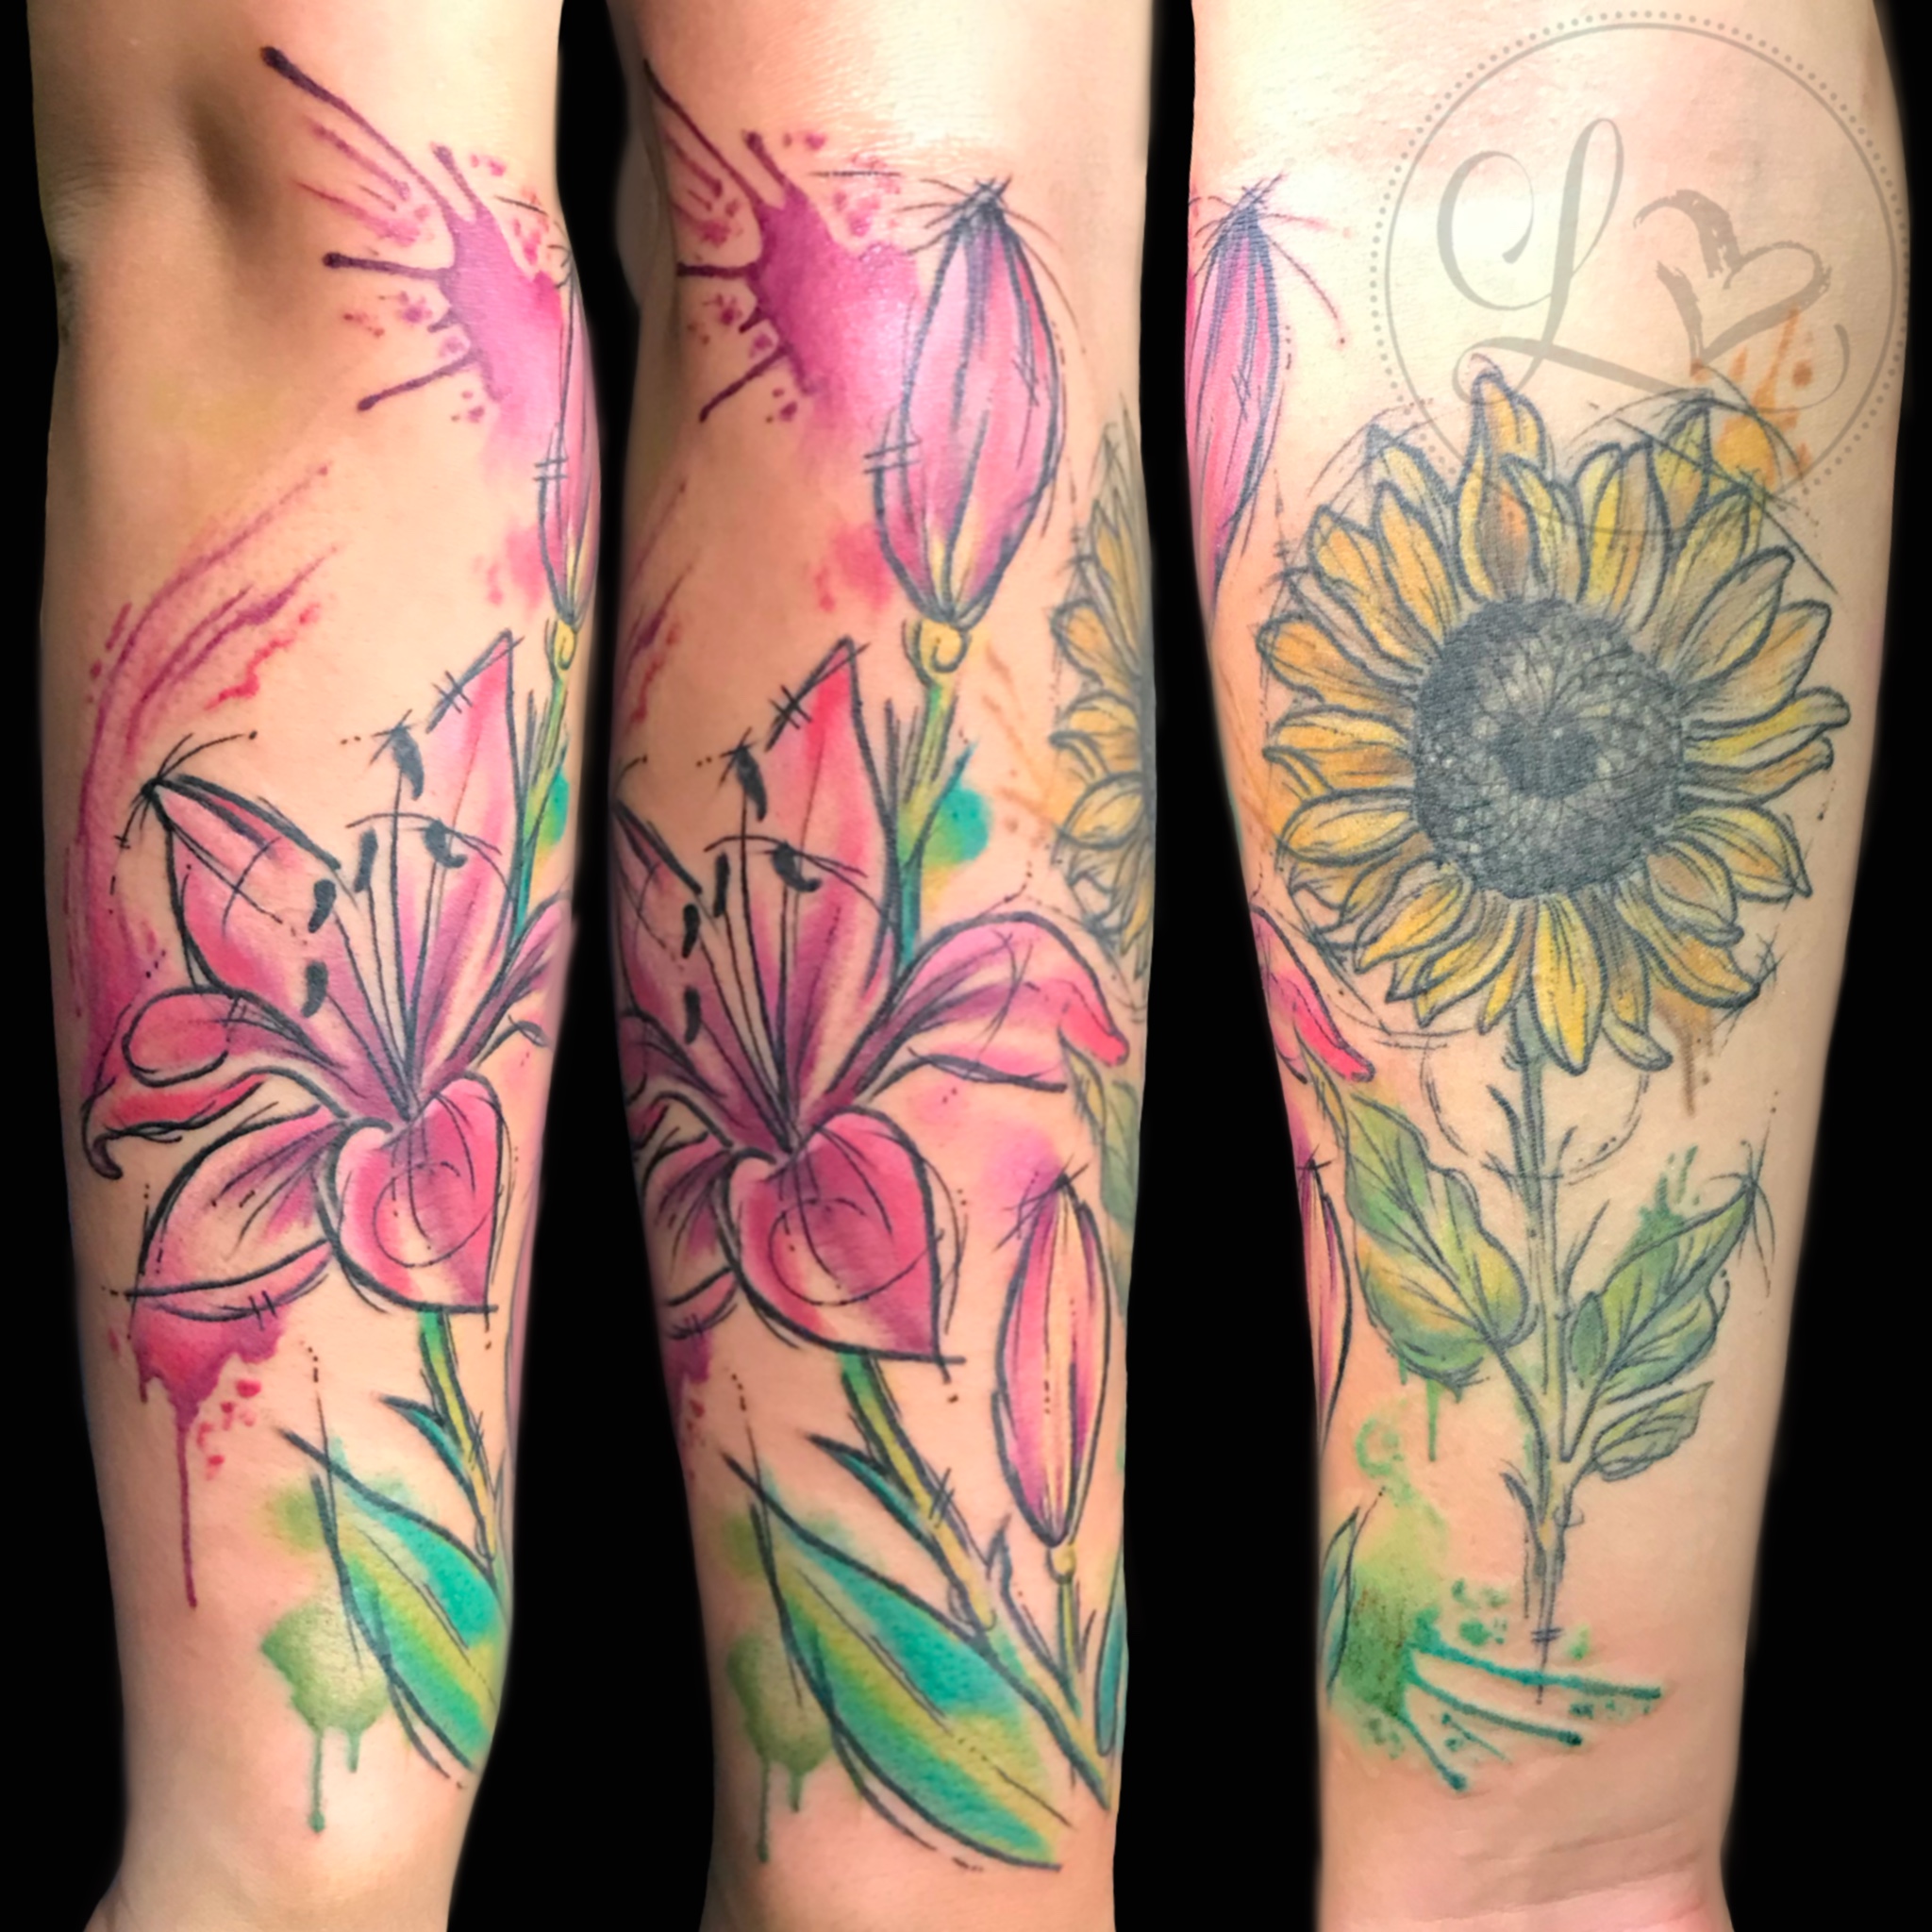 Watercolor half sleeve tattoo of pink stargazer lily and sunflower